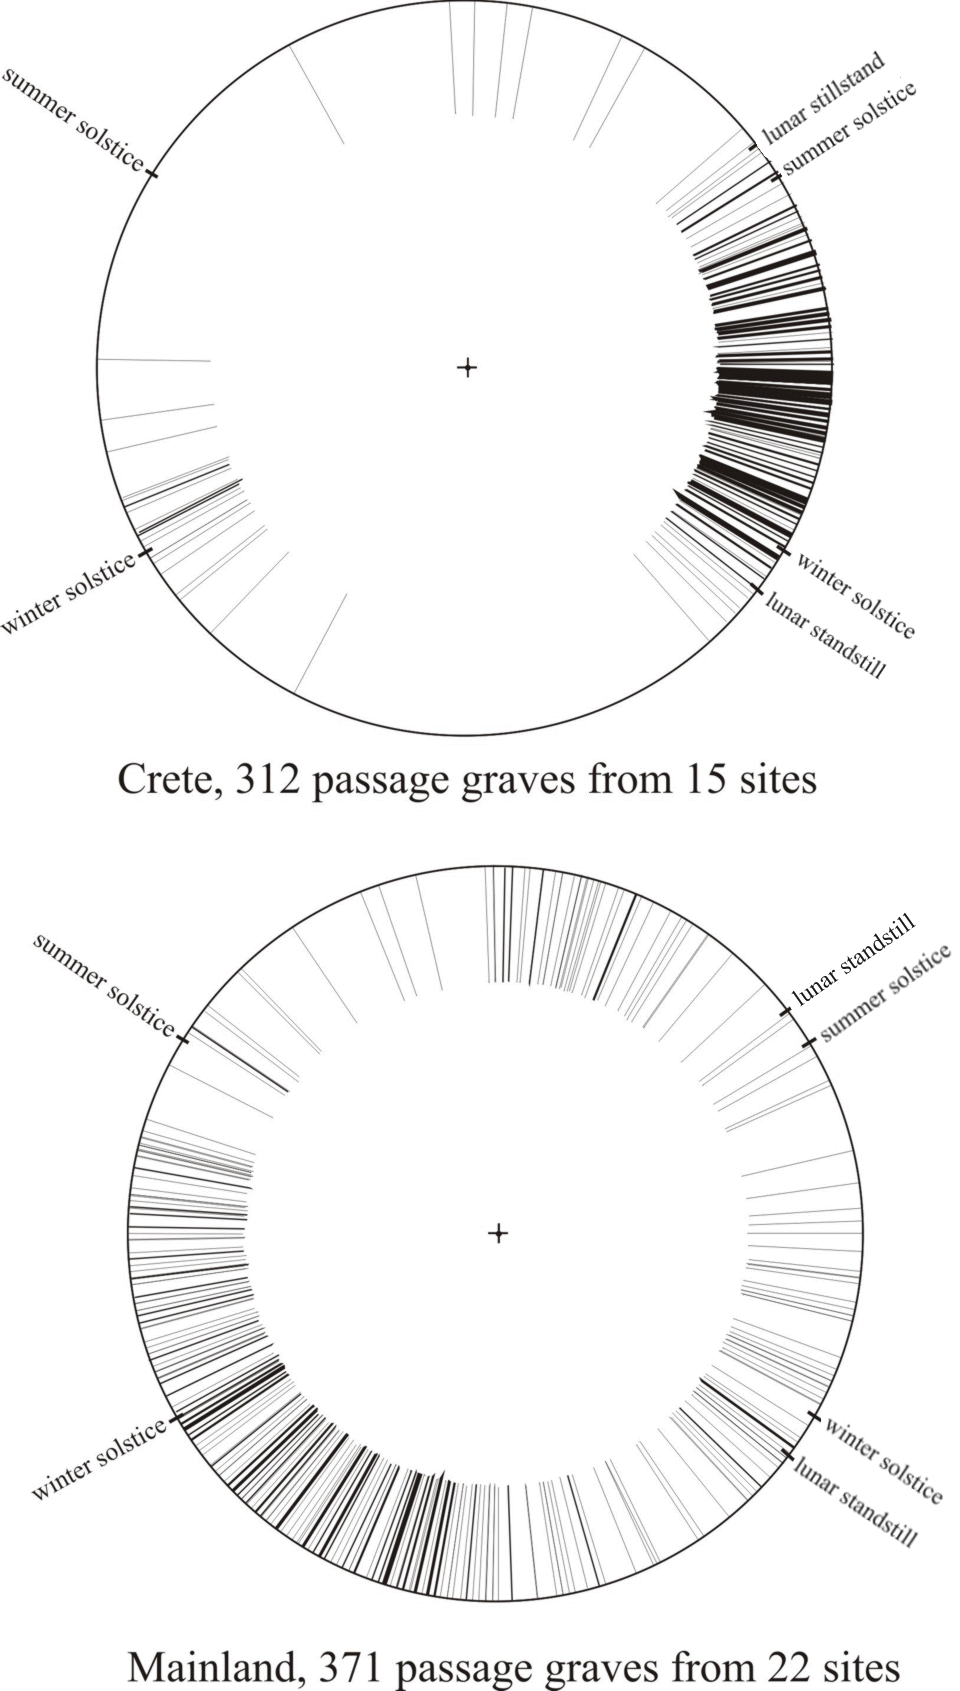 orientations of passages graves in Crete and in Greece